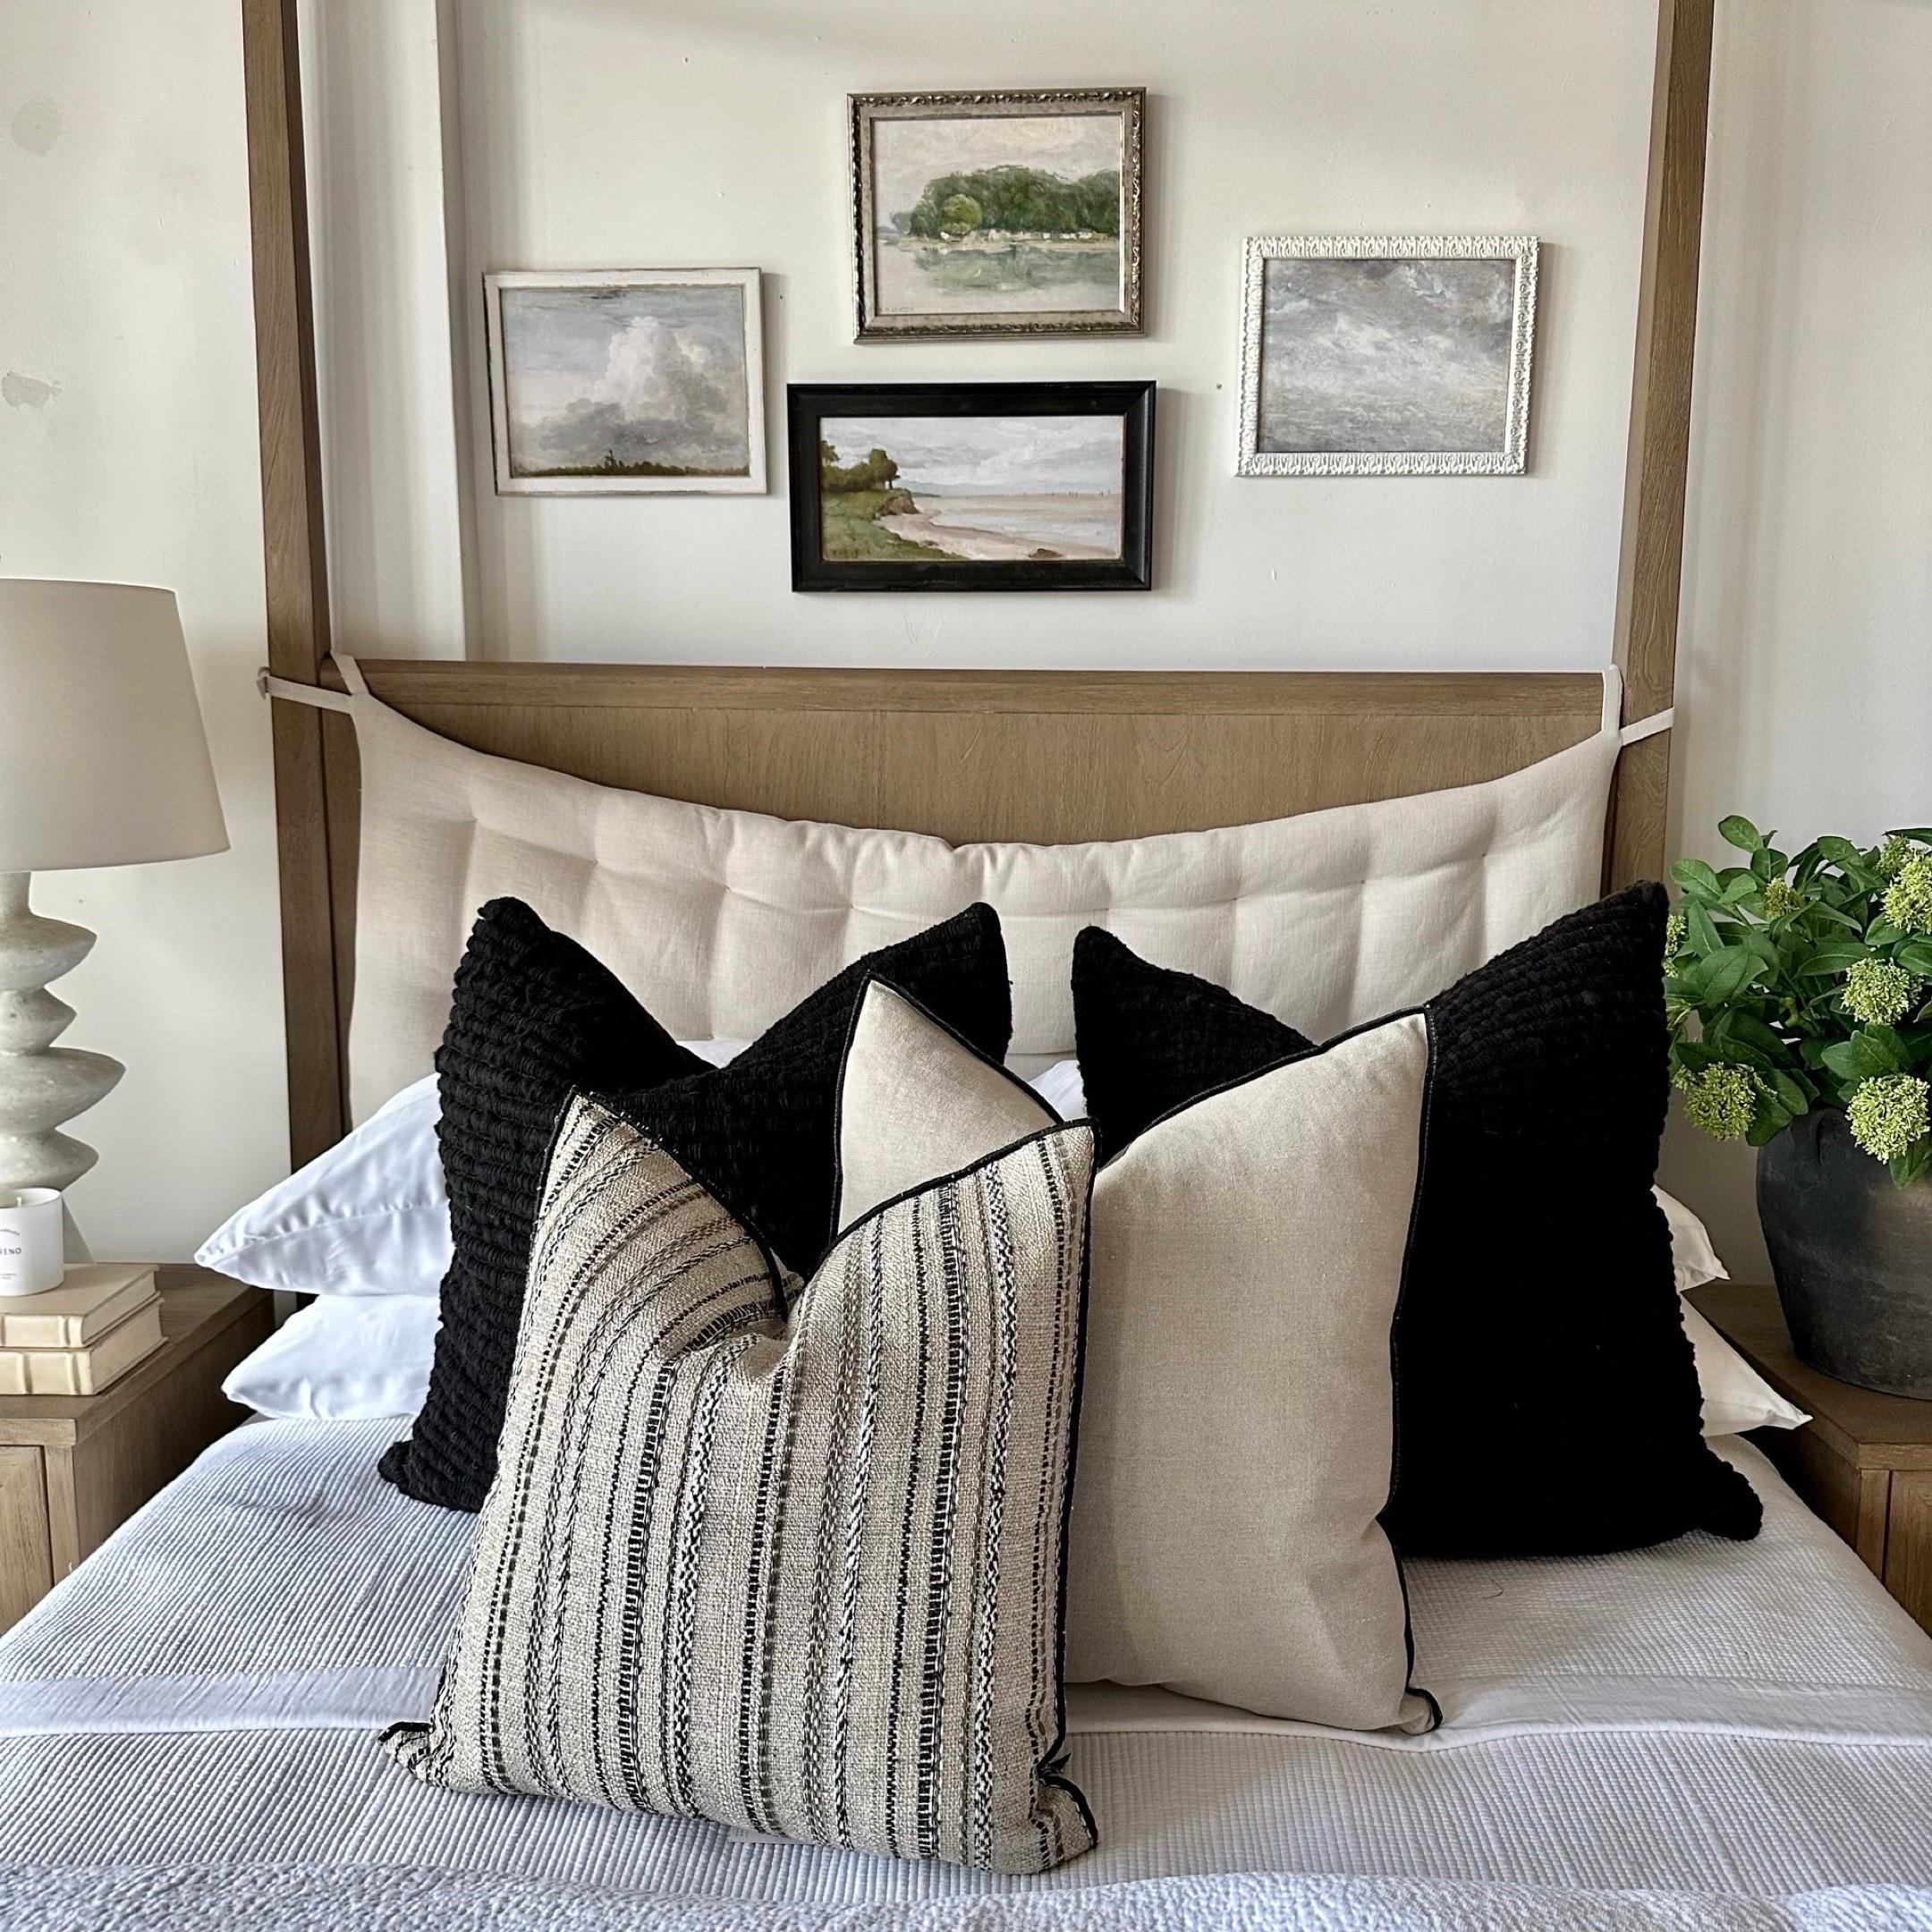 Custom toile bivouac rayee pillow
Made in France
Custom bloom home pillow in a thick nubby natural linen with woven embroidered stripes in black, creamy white, and coco brown. Finished with a black stitched edge.
Heavy weight, very soft